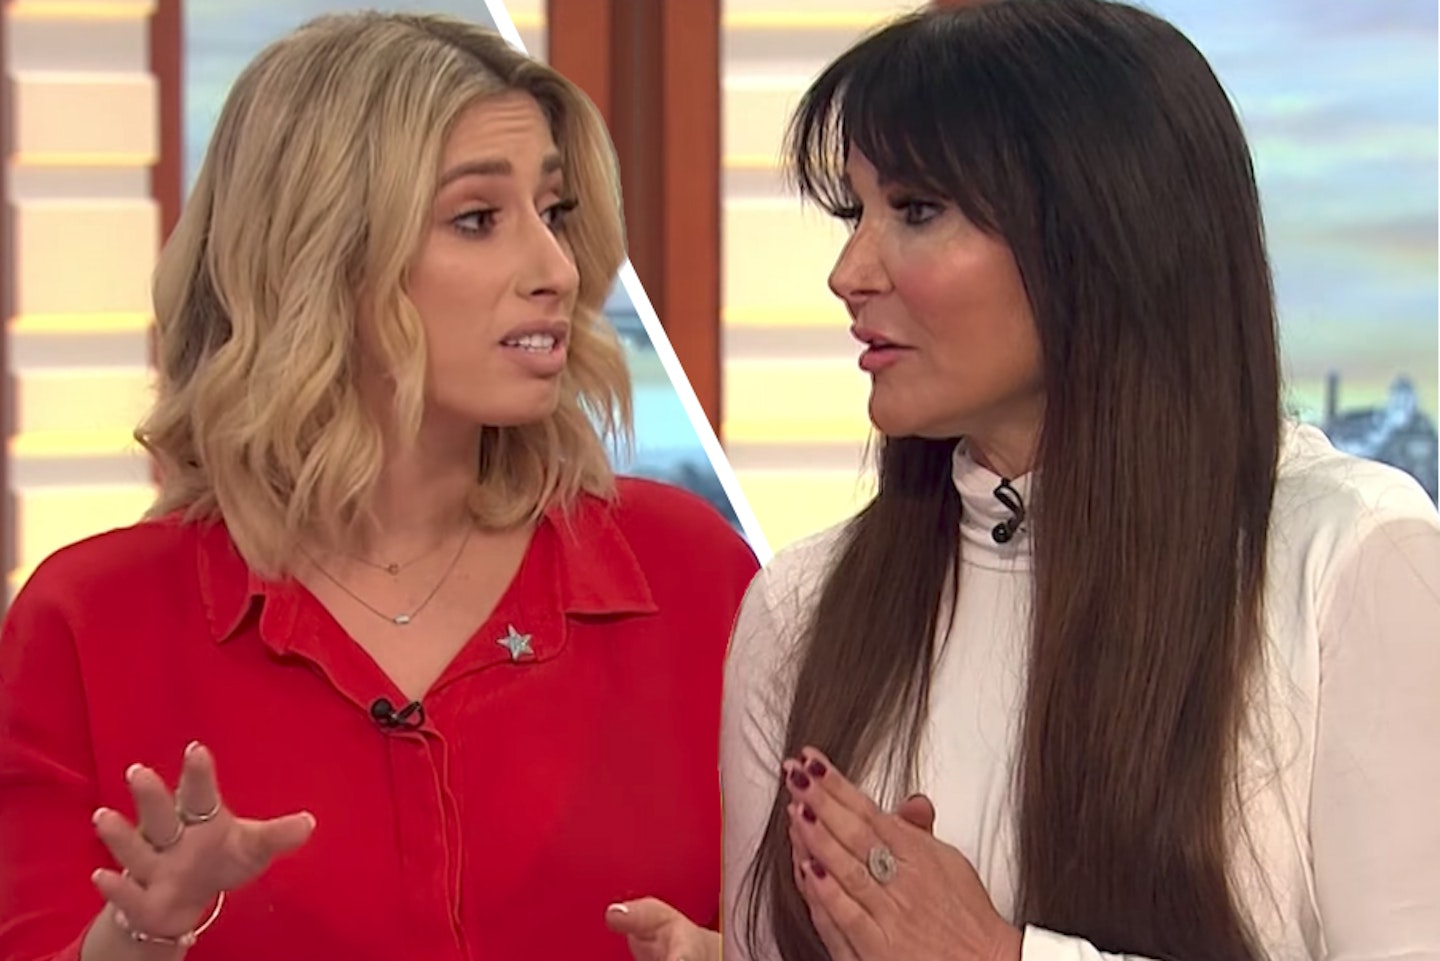 stacey-solomon-heated-argument-lizzie-cundy-body-positivity-gmb